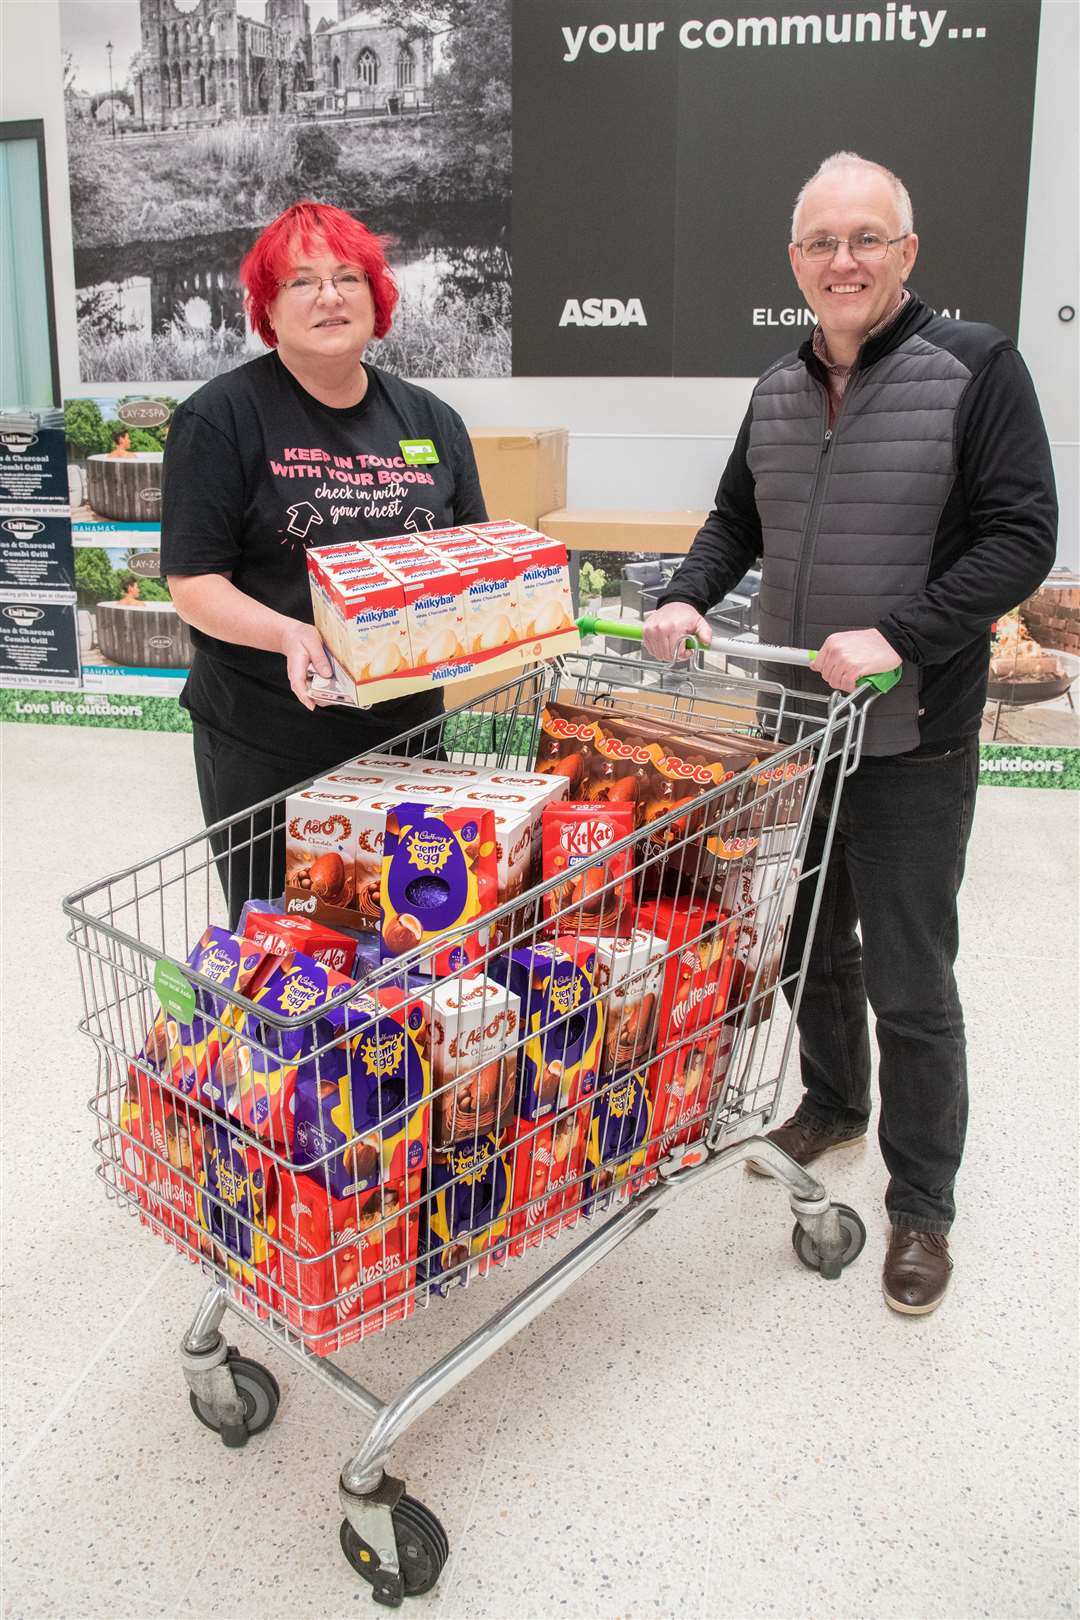 Asda Elgin community champion Irene Geddes with the donation to the Moray Easter Egg appeal collected by Chris Saunderson, joint content editor of The Northern Scot. Picture: Daniel Forsyth